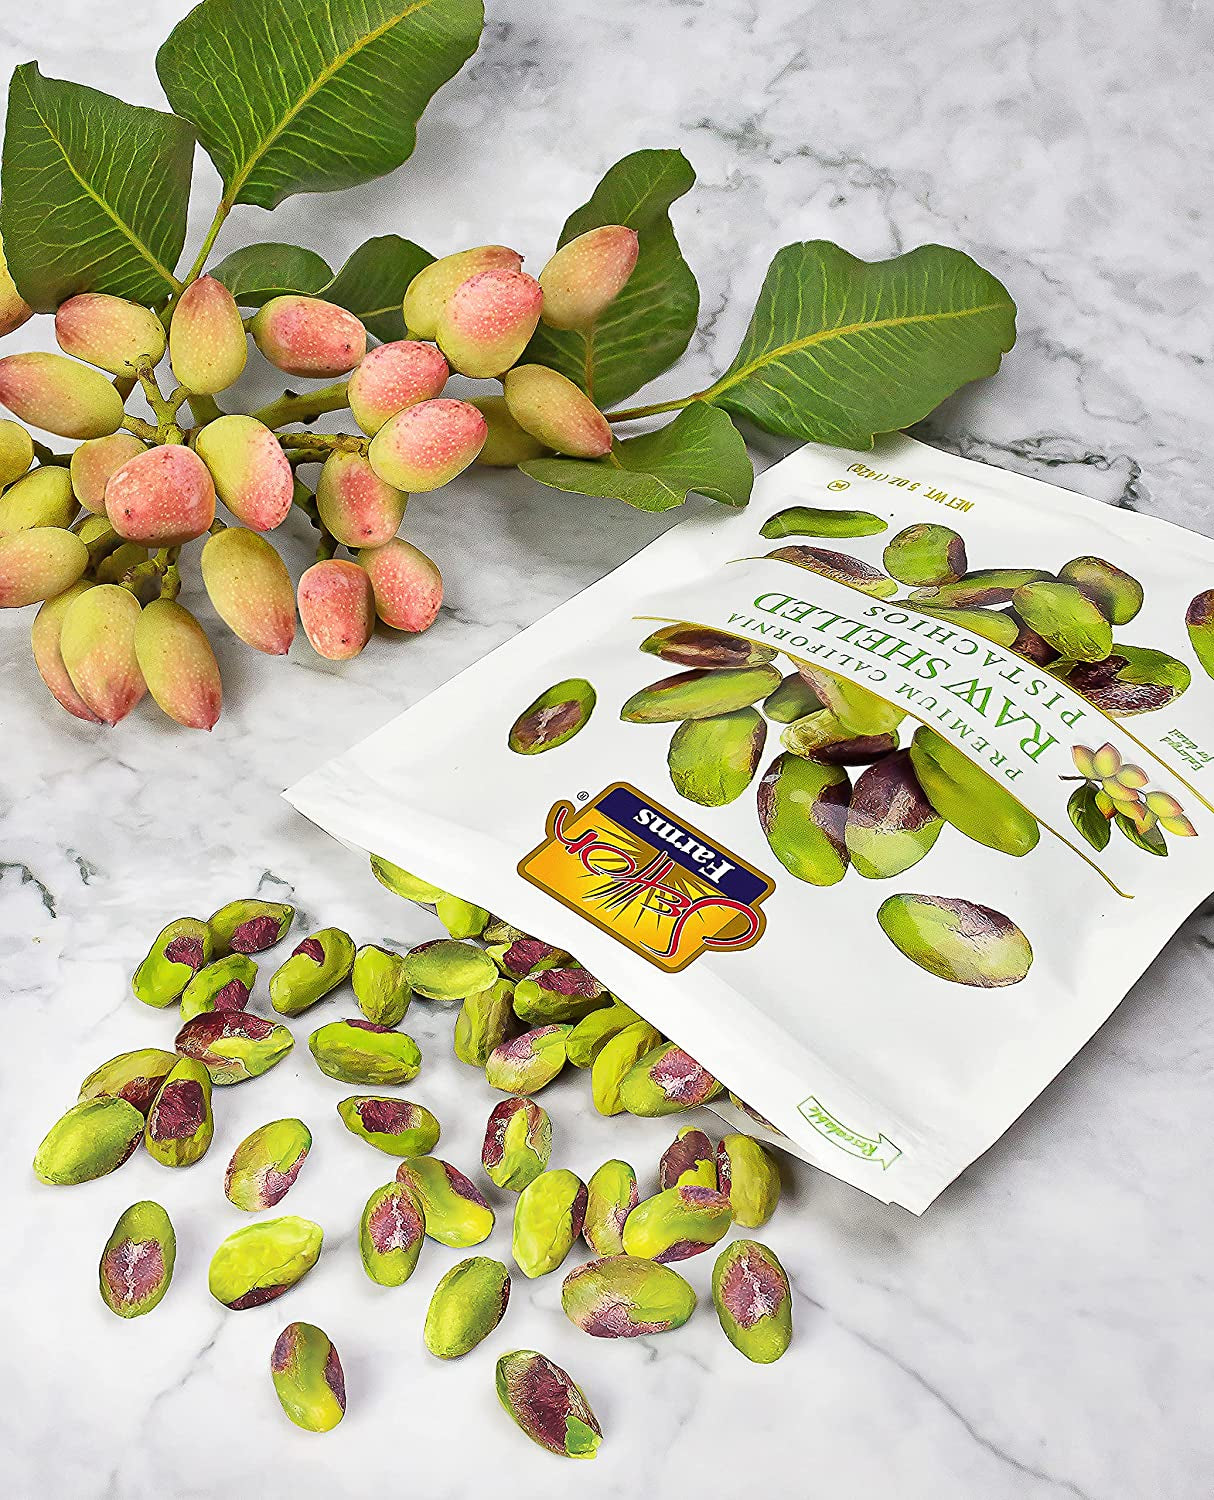 Setton Farms Naturally Raw Shelled Pistachios, No Shell, Non-Gmo Project Verified, Certified Gluten Free, Vegan and Kosher, Heart Healthy Snack, 5 Oz